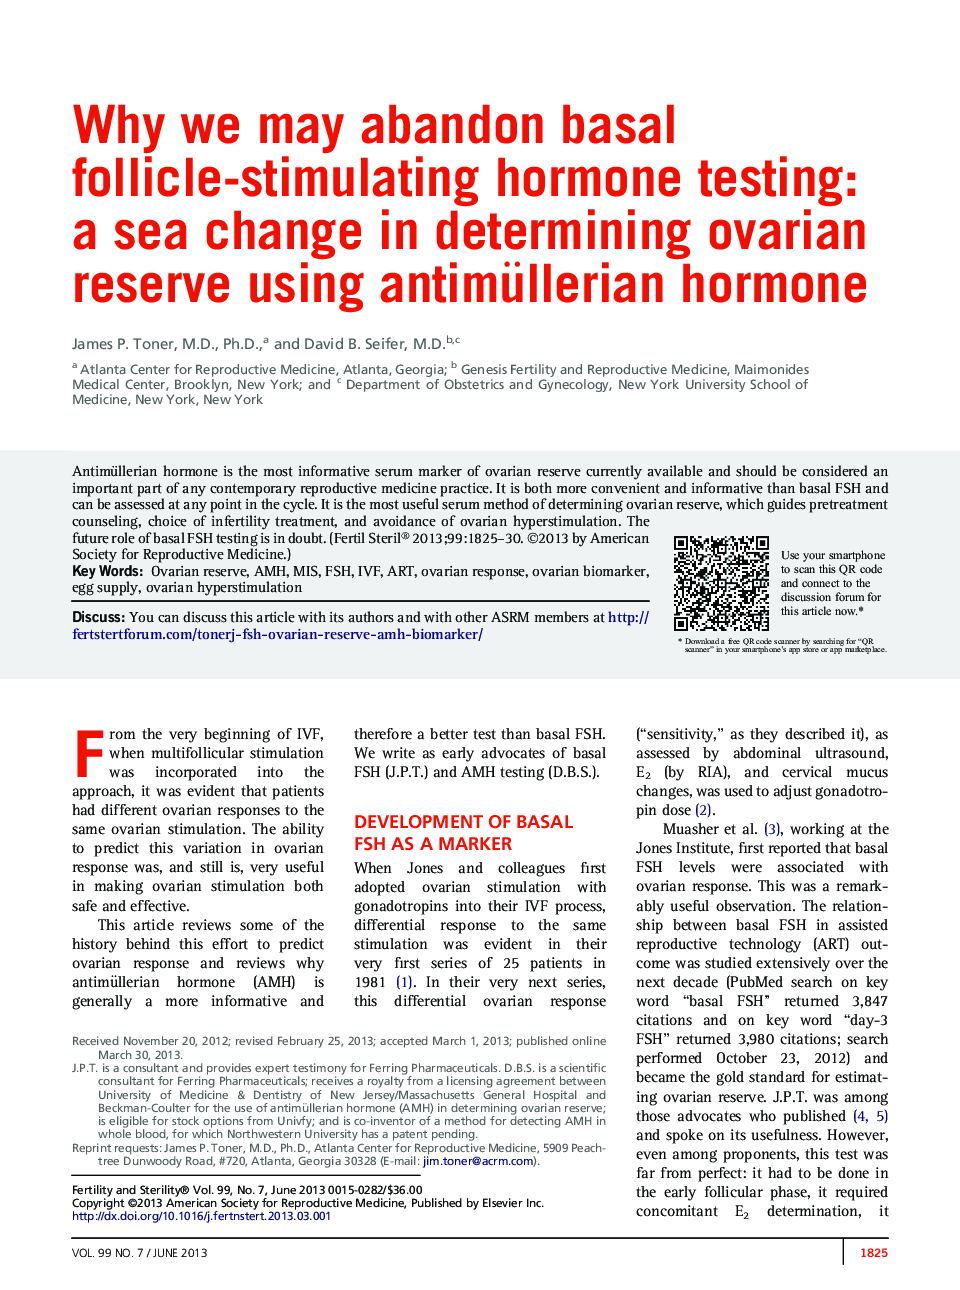 Why we may abandon basal follicle-stimulating hormone testing: a sea change in determining ovarian reserve using antimüllerian hormone